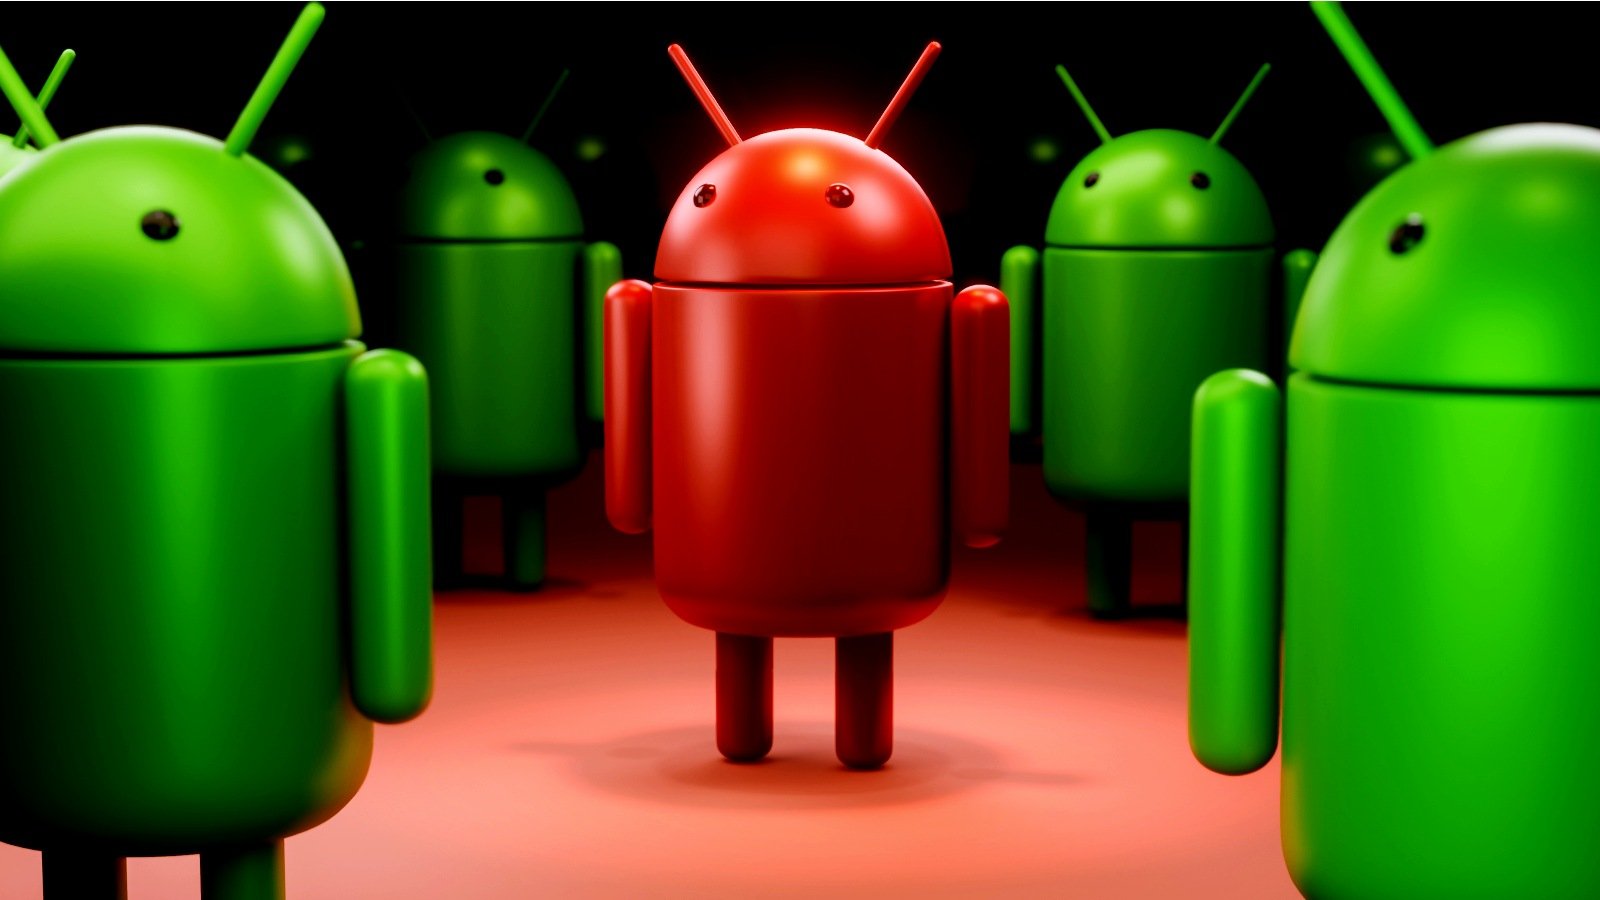 New Android malware apps installed 10 million times from Google Play